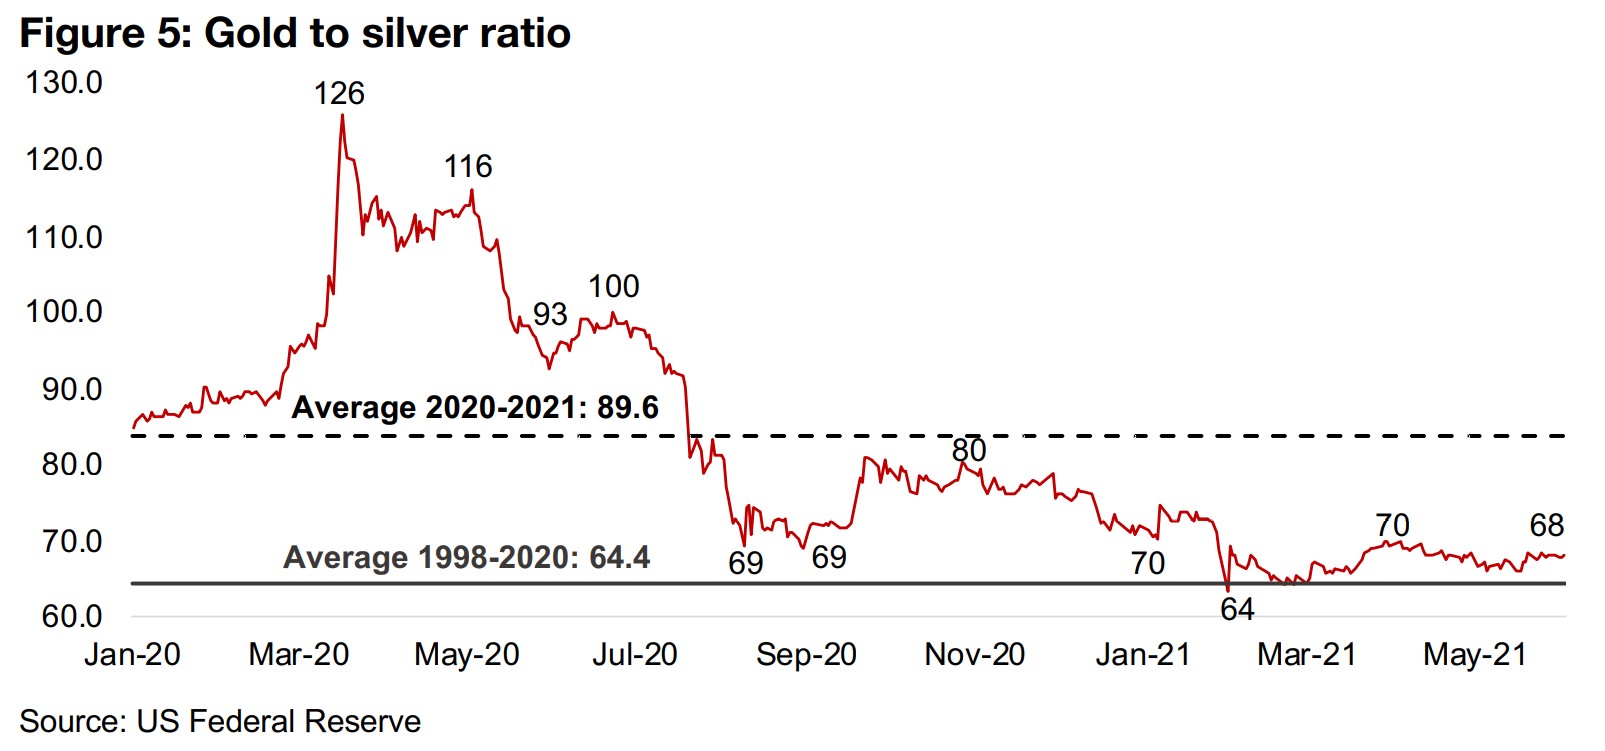 Gold and silver ratio settling down around mid-term average